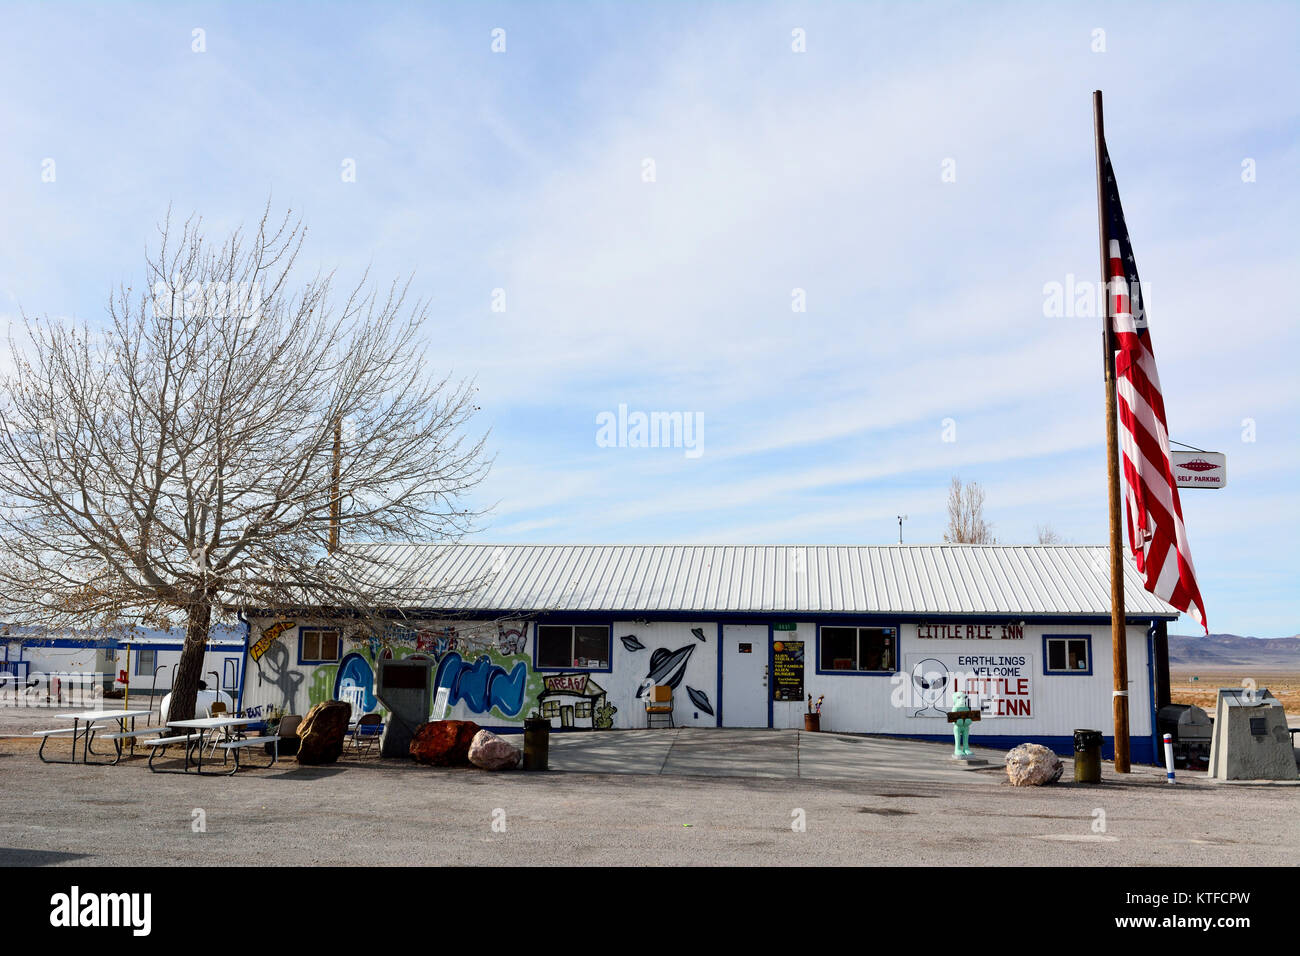 Rachel, Nevada, United States of America - November 21, 2017. Exterior view of Little A'Le'Inn hotel in Rachel, Nevada, with American flag, commercial Stock Photo